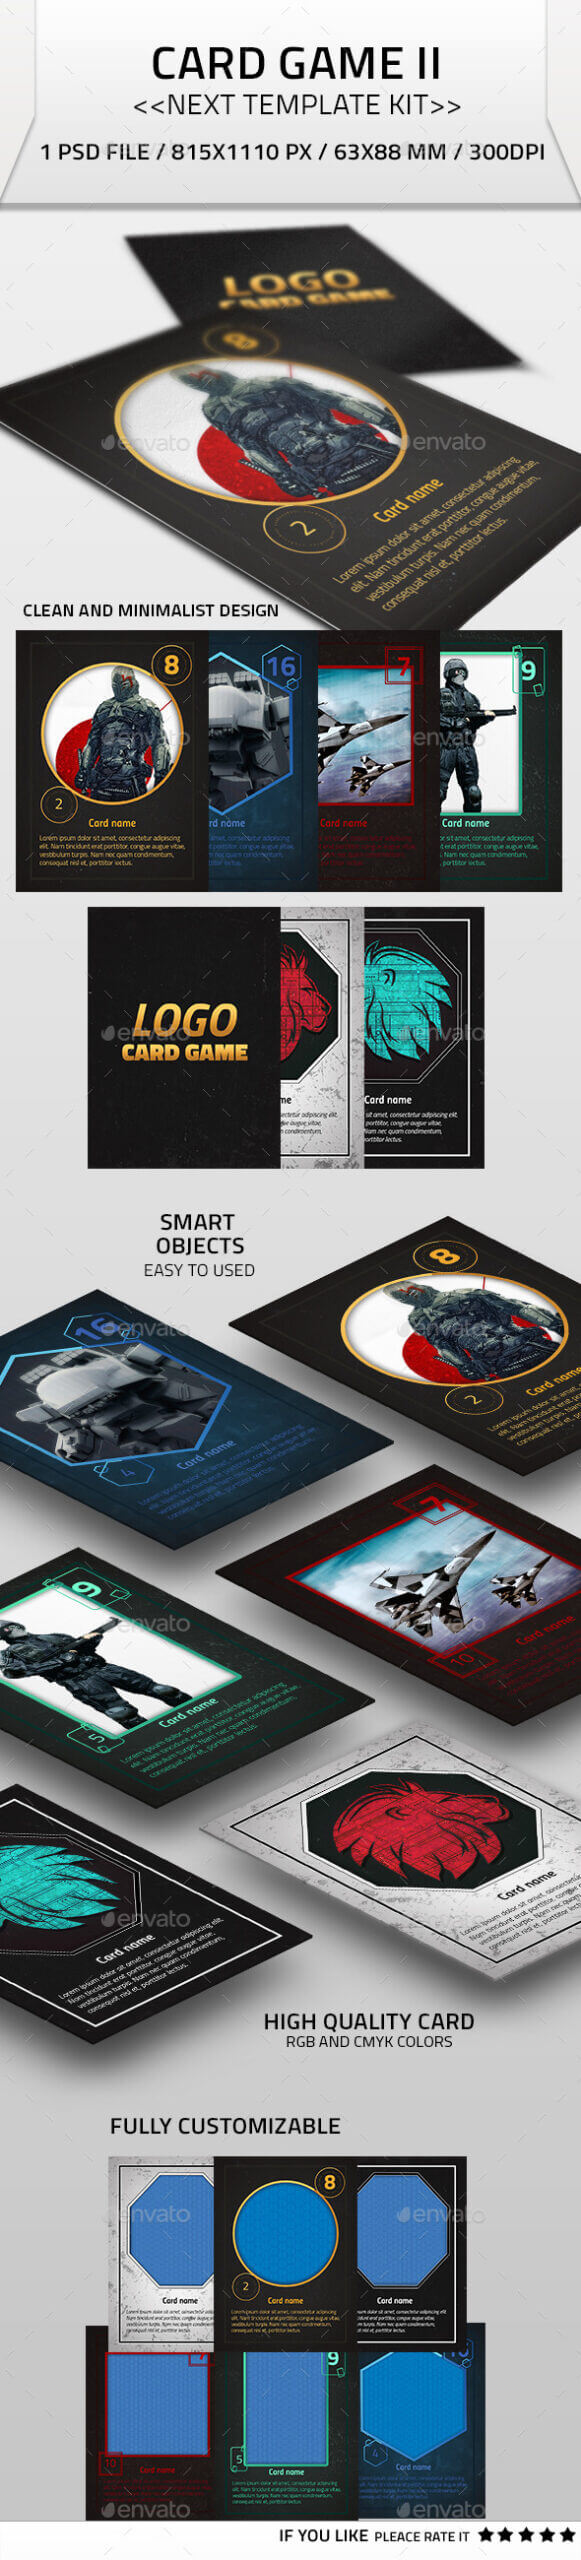 Card Game Graphics, Designs & Templates From Graphicriver Intended For Superhero Trading Card Template